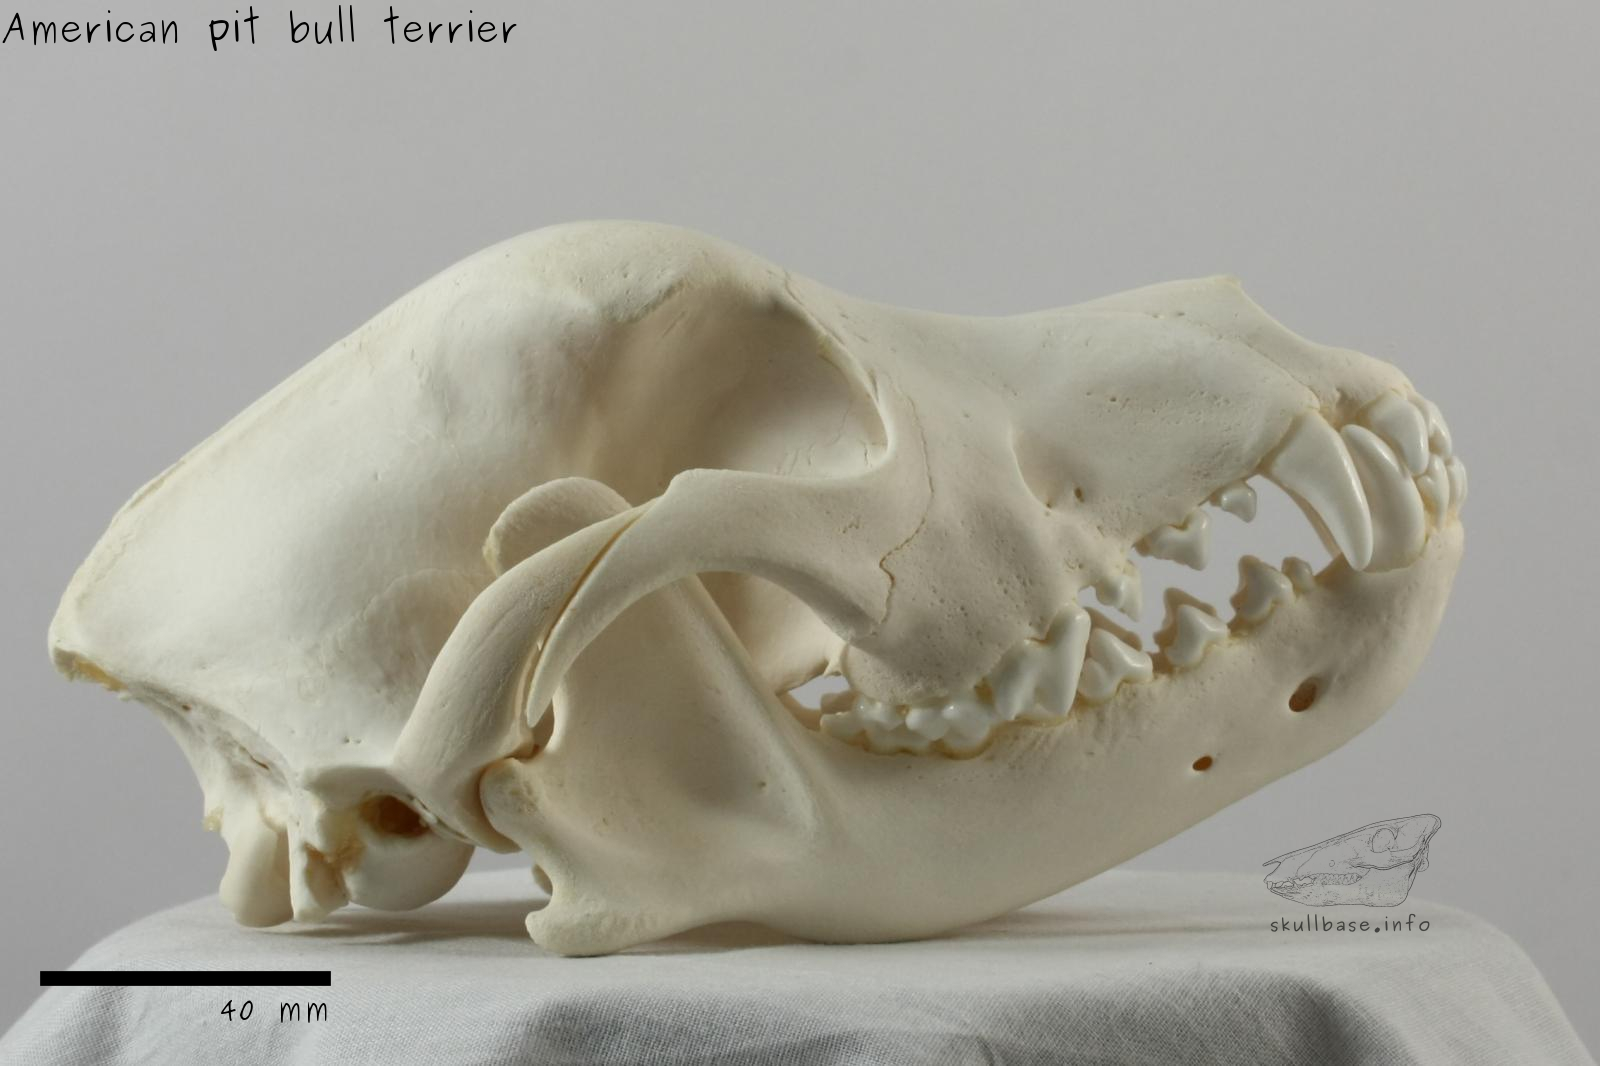 American pit bull terrier (Canis lupus familiaris) skull lateral view